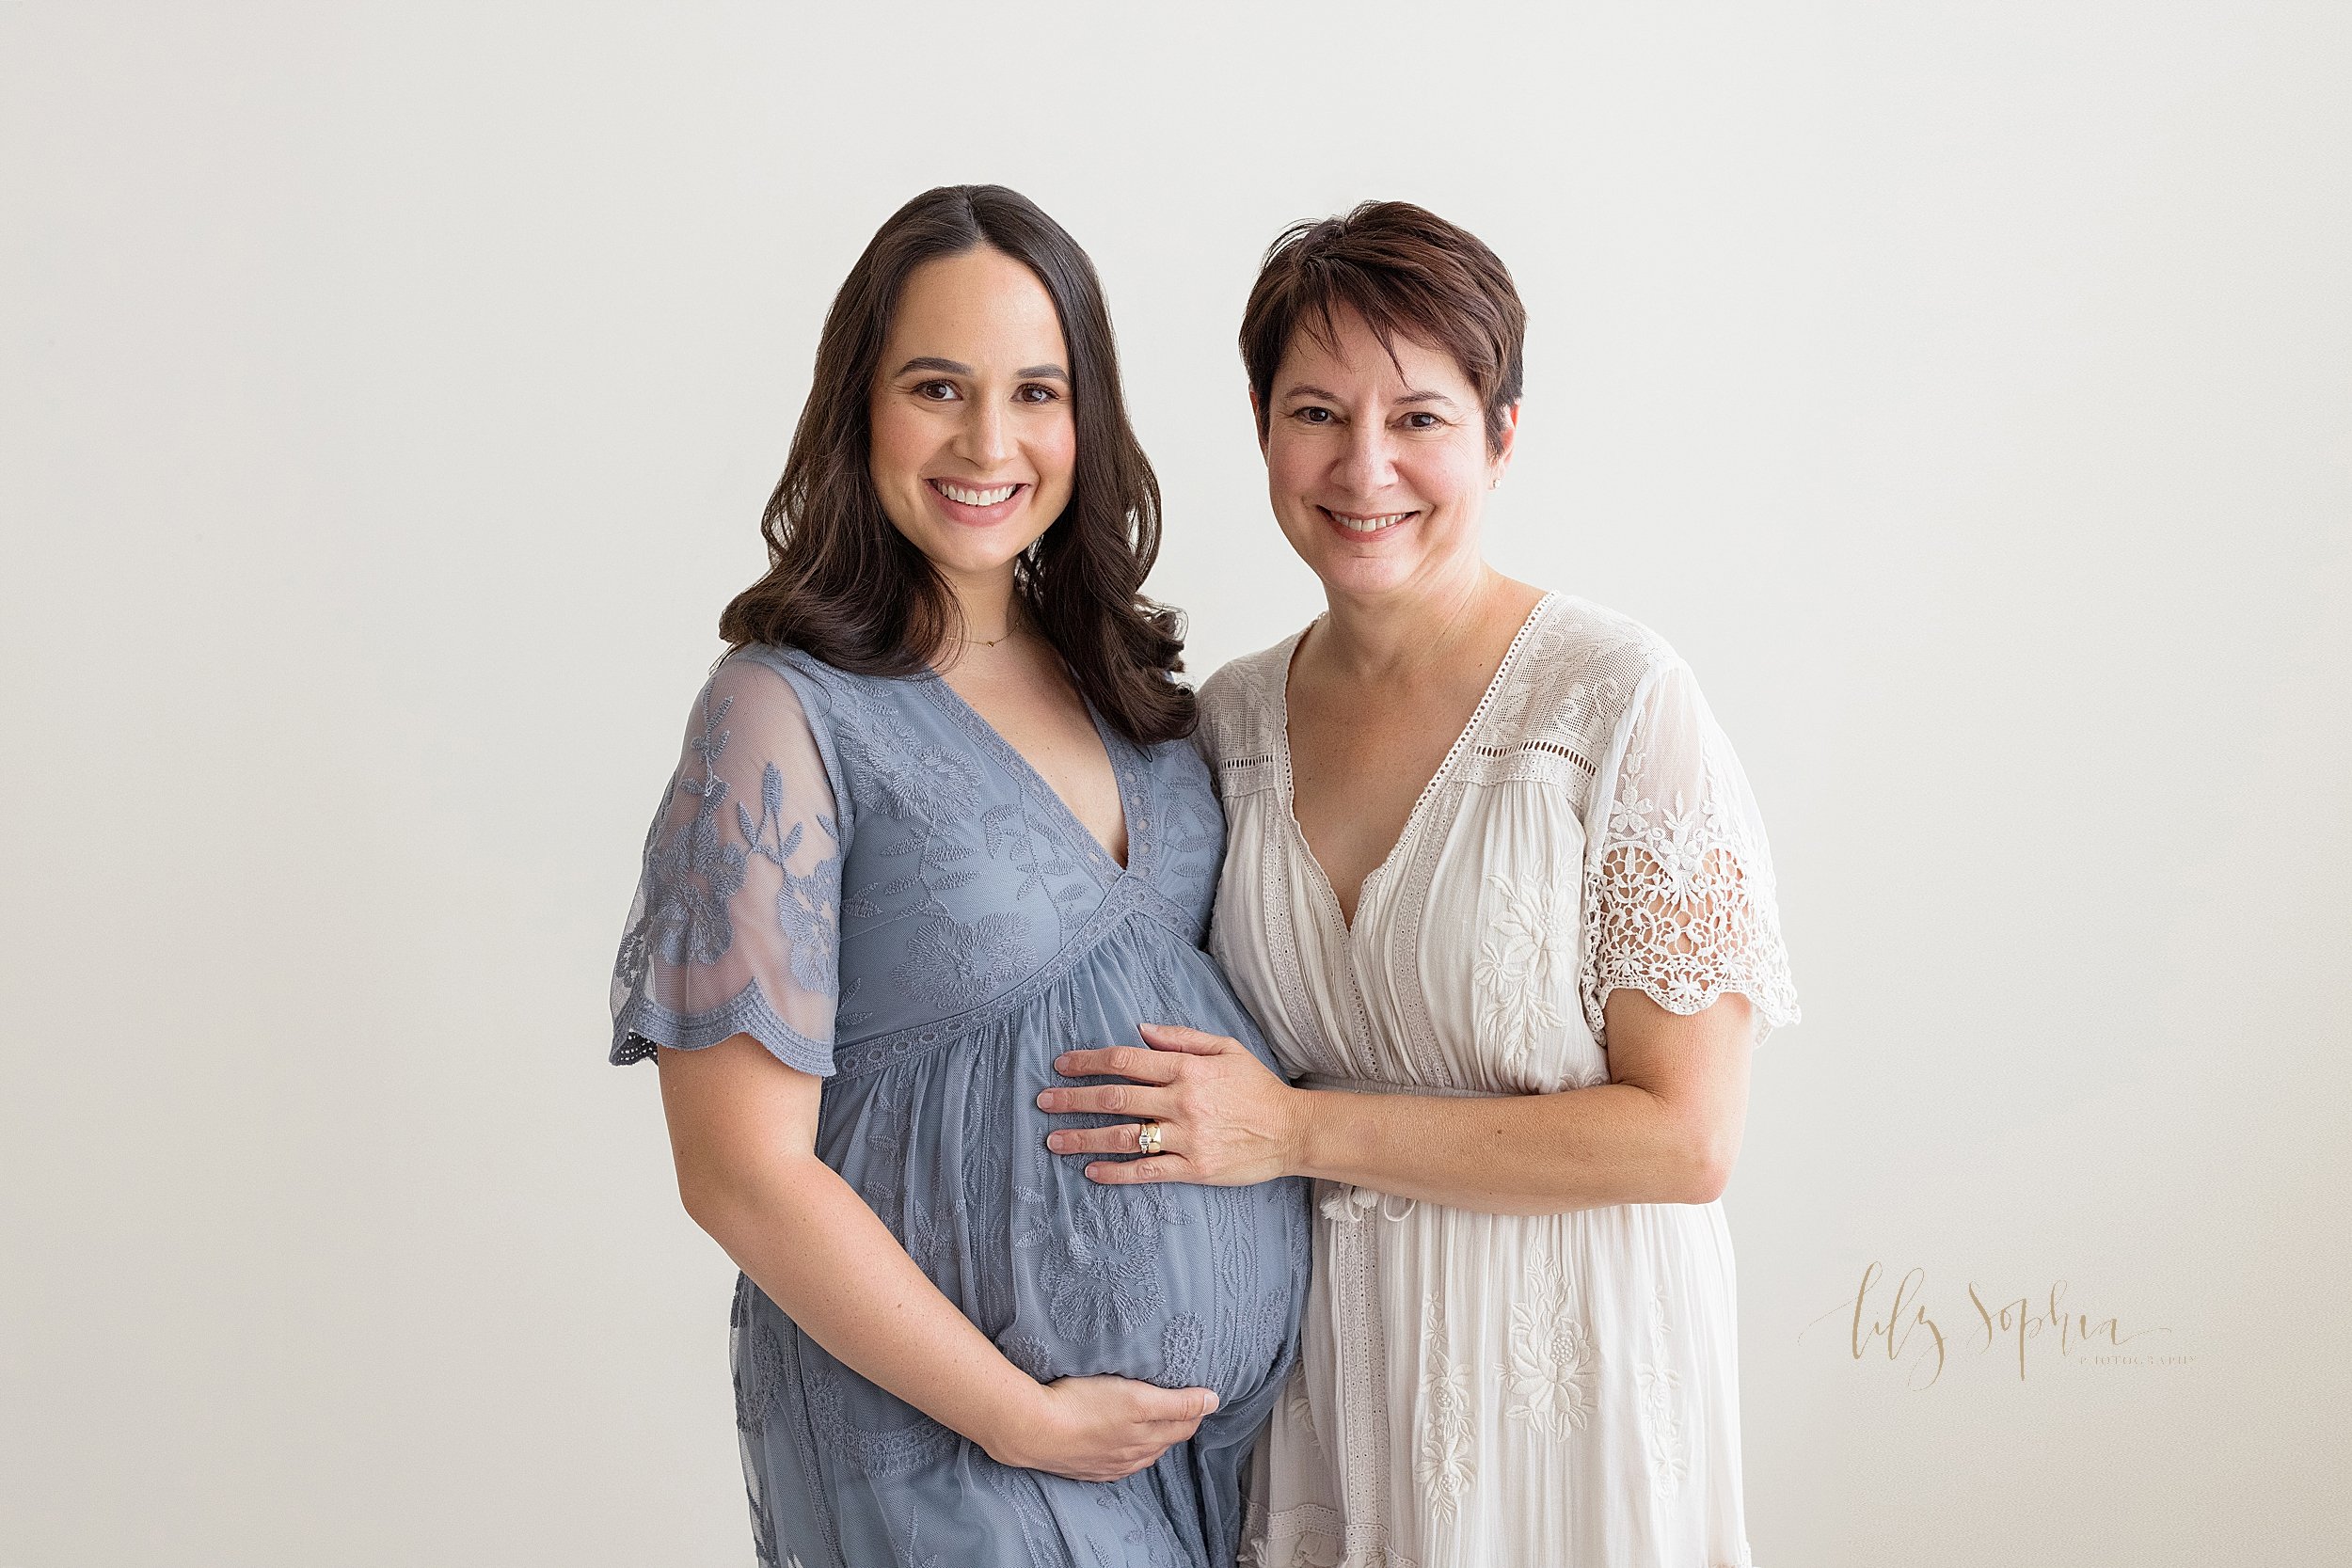  Maternity session with an expectant mother and her mother, the baby’s grandmother, taken in a studio near Poncey Highlands in Atlanta using natural light. 